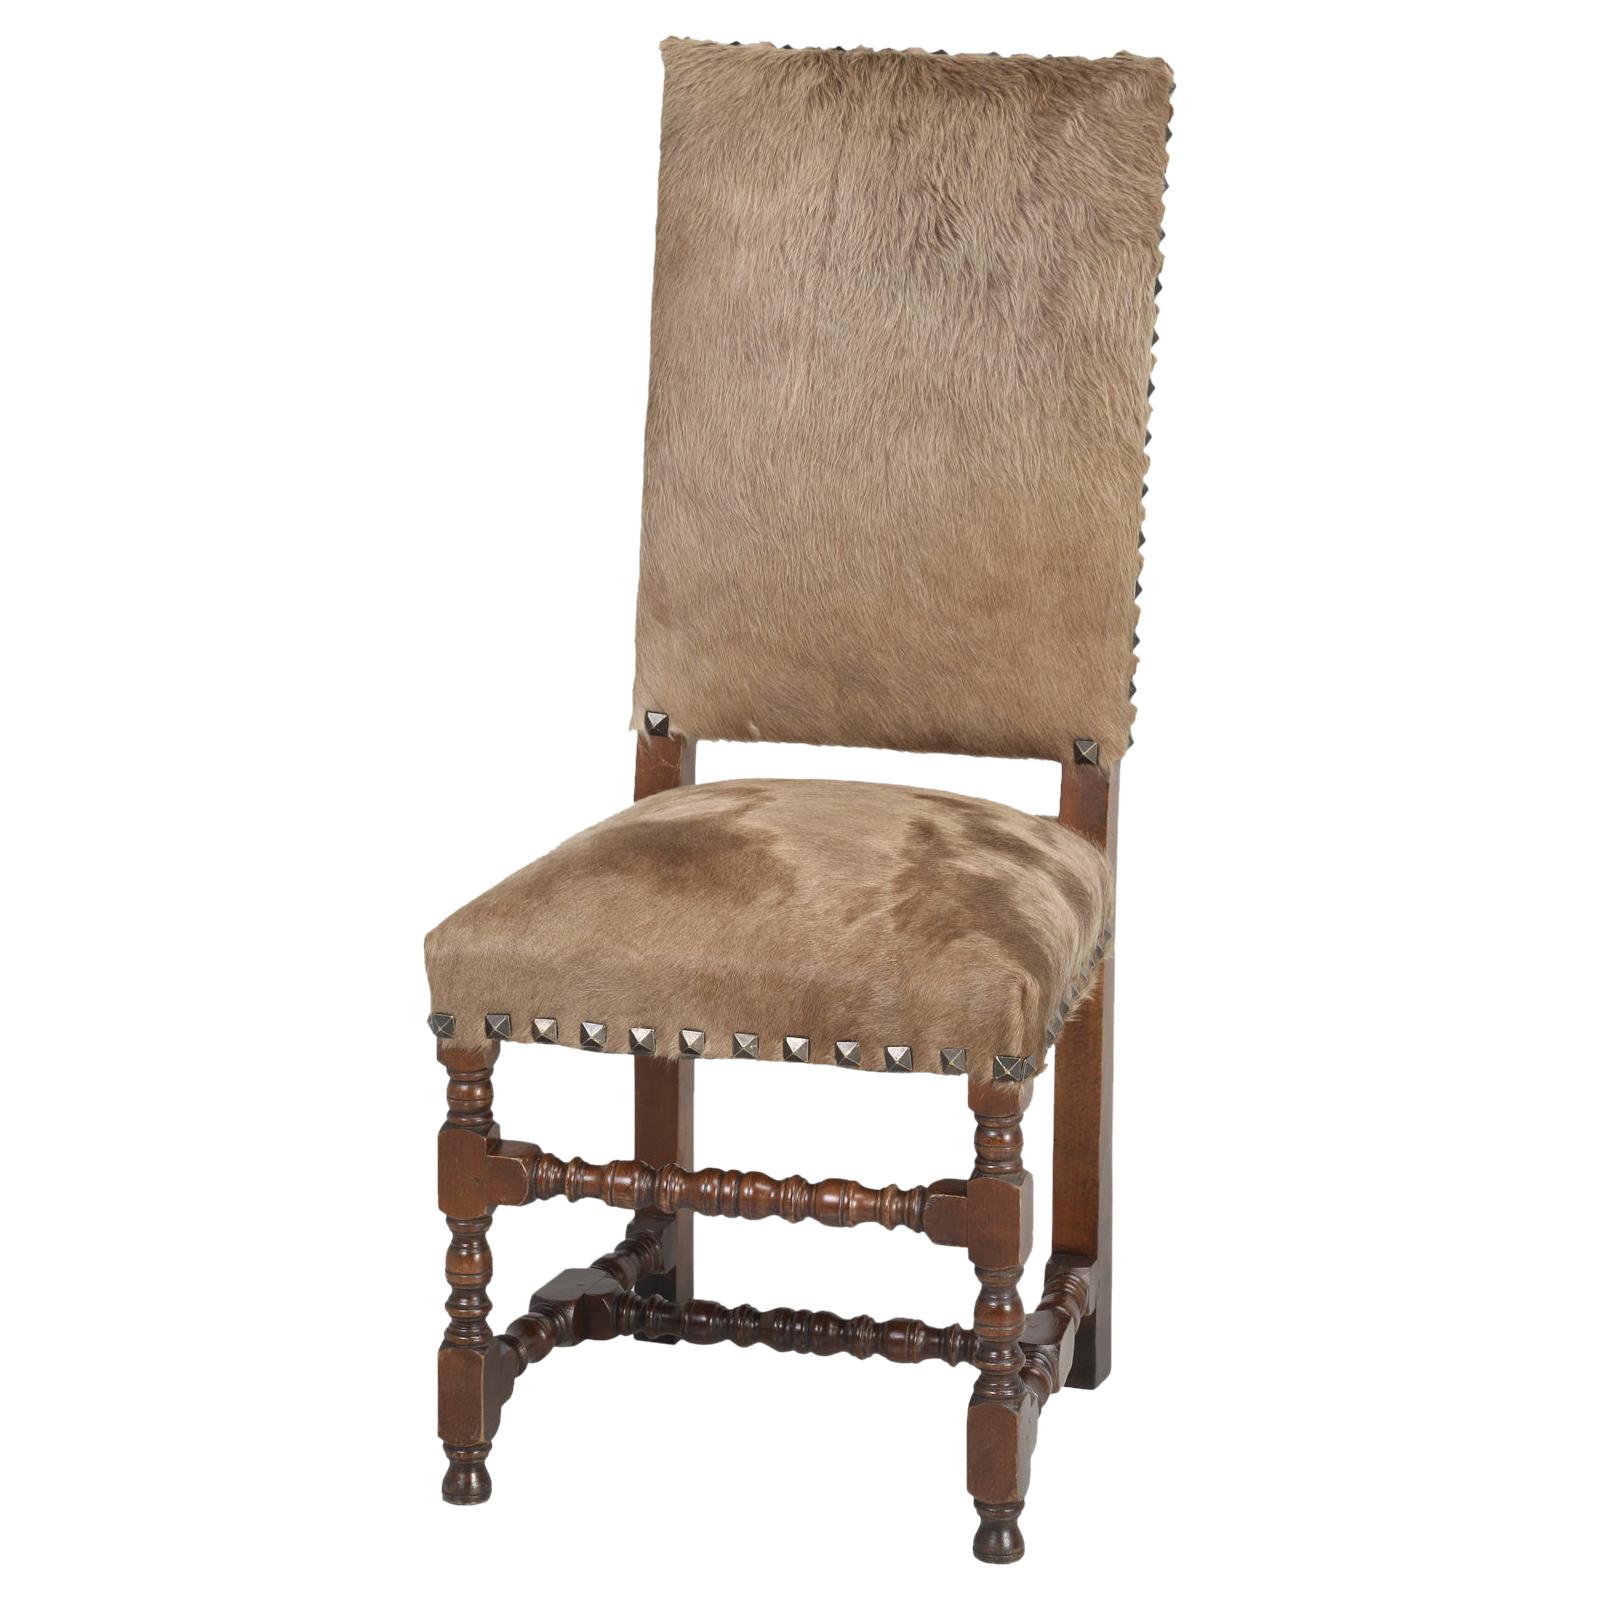 Antique French Louis XIII Style Side Chair Covered in Cow Fur on Hide